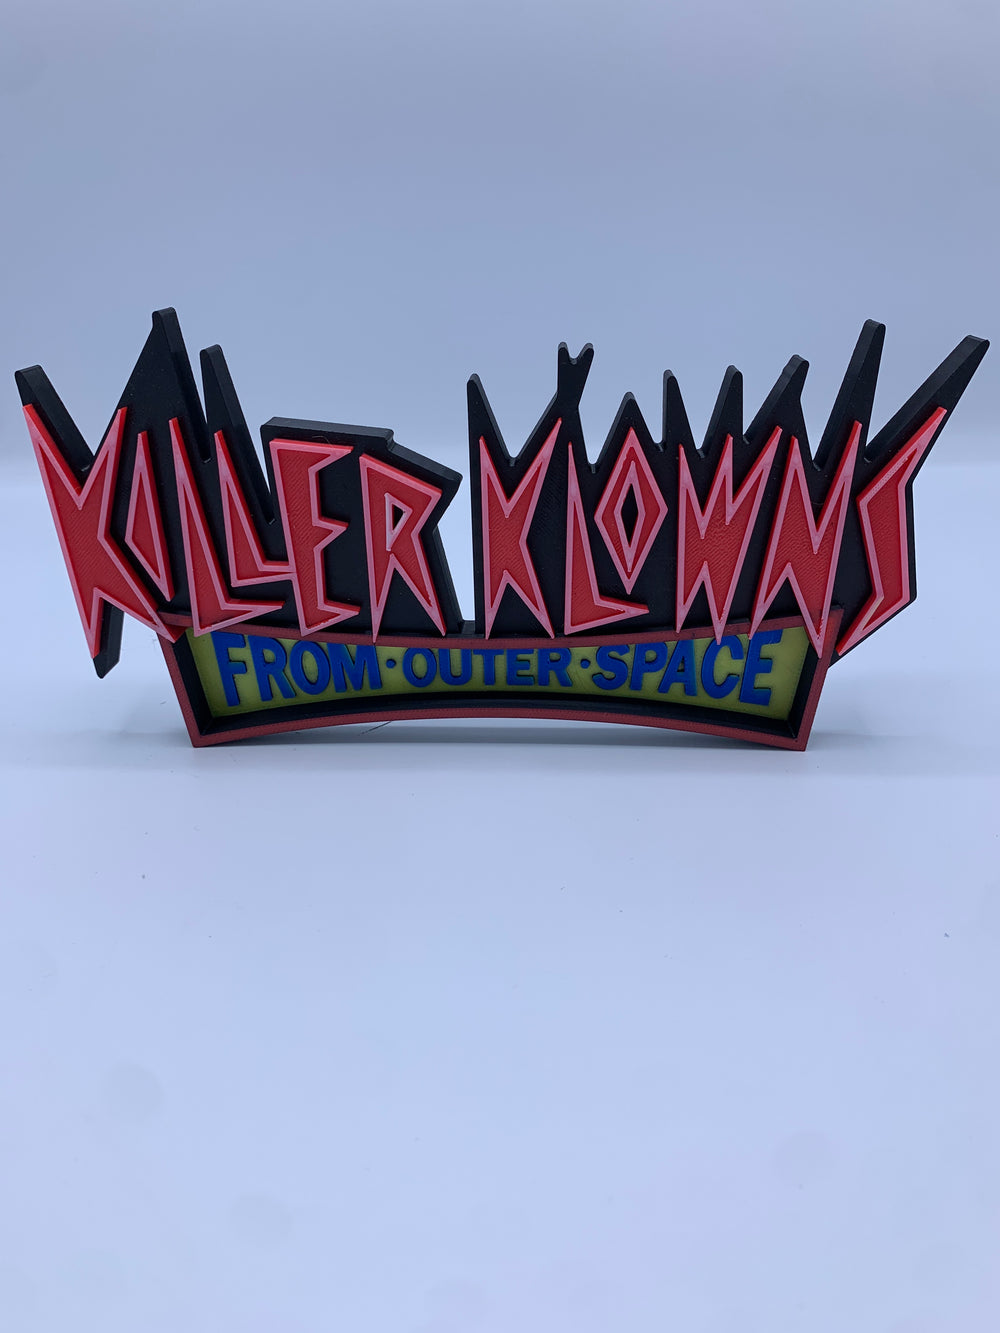 Killer Klowns from outer space sign